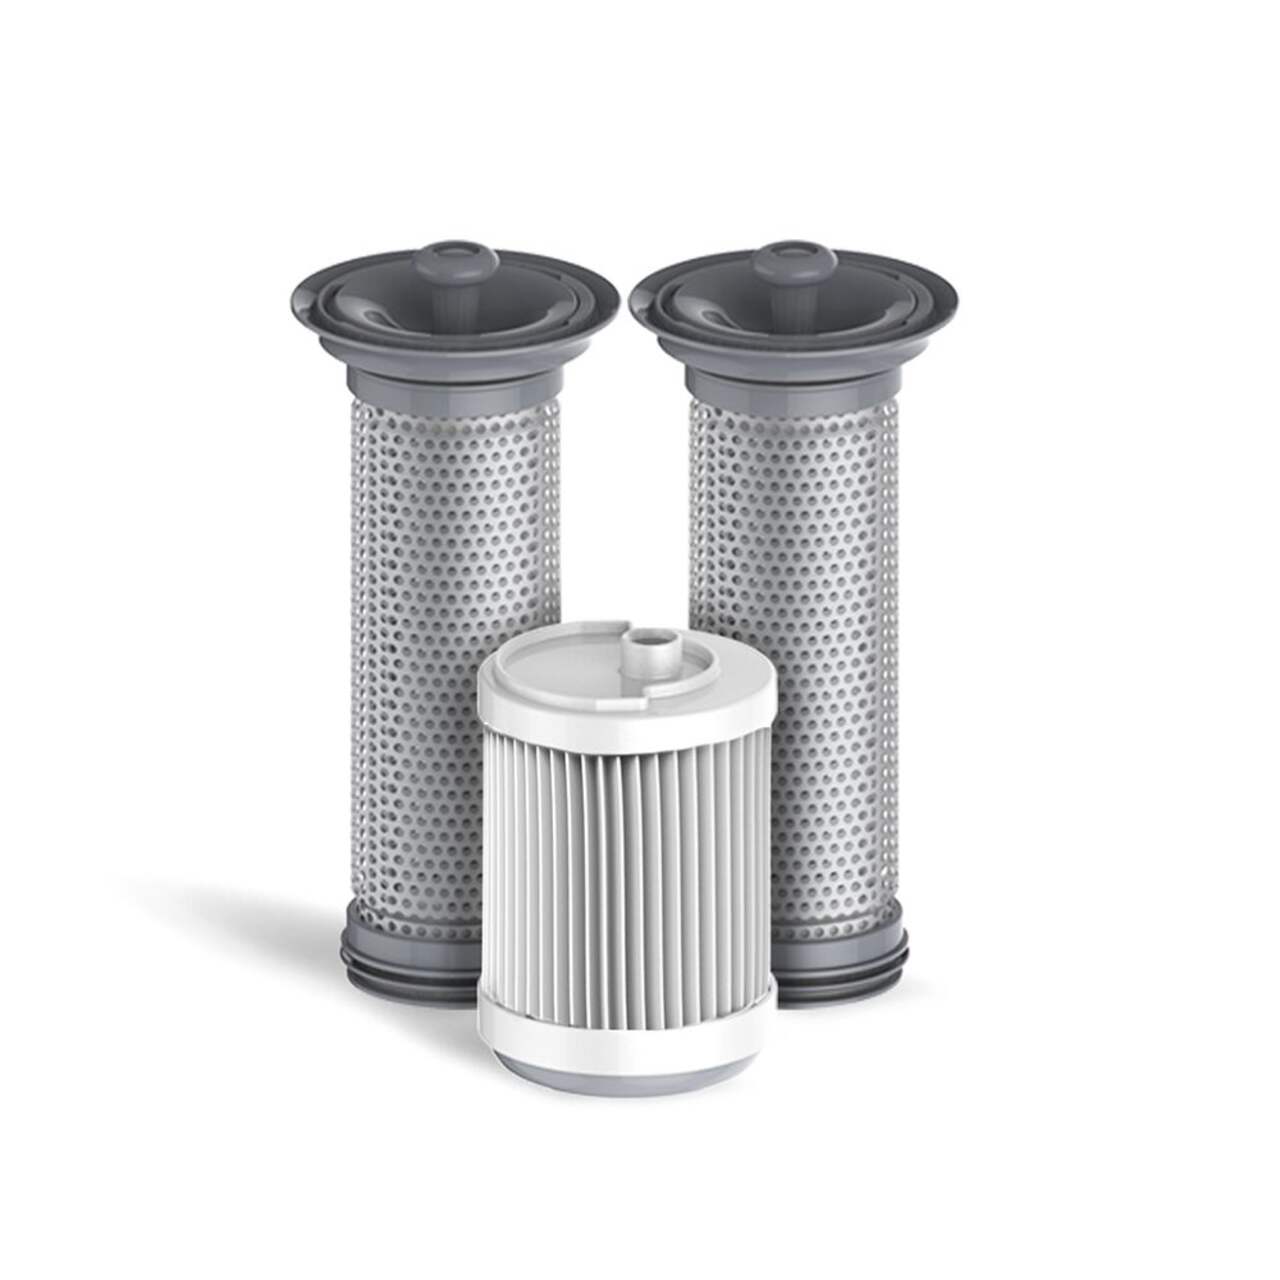 https://media-www.canadiantire.ca/product/living/cleaning/vacuums-and-floorcare/0437115/tineco-s11-a11-a10-t1-t2-t3-replacement-filter-kit-65eb4f50-dbe4-4907-841b-dd7d069c8632-jpgrendition.jpg?imdensity=1&imwidth=640&impolicy=mZoom